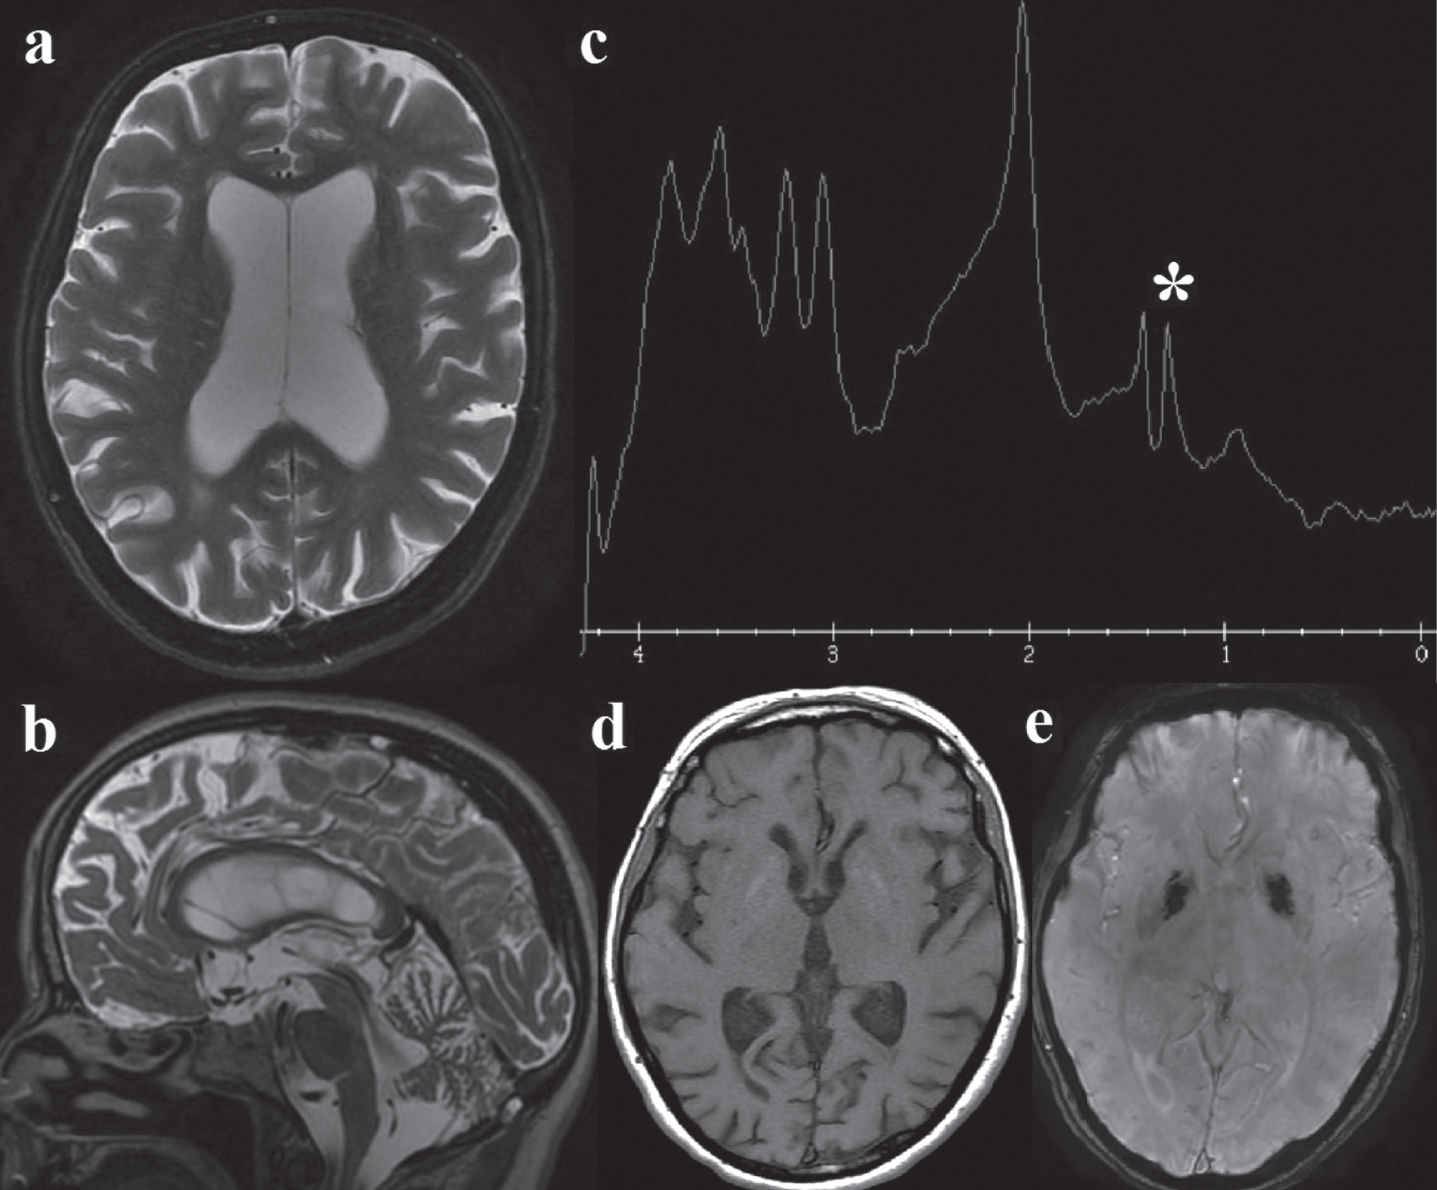 Brain MRI: a. Axial T2, showing global cerebral atrophy with ex-vacuo lateral ventricles dilatation; b. Sagittal T2, cerebellar atrophy; c. MR spectroscopy: the white asterisk (*) marks the lactate peak; d. axial T1 and e. susceptibility-weighted angiography (SWAN): mild bipallidal calcifications.